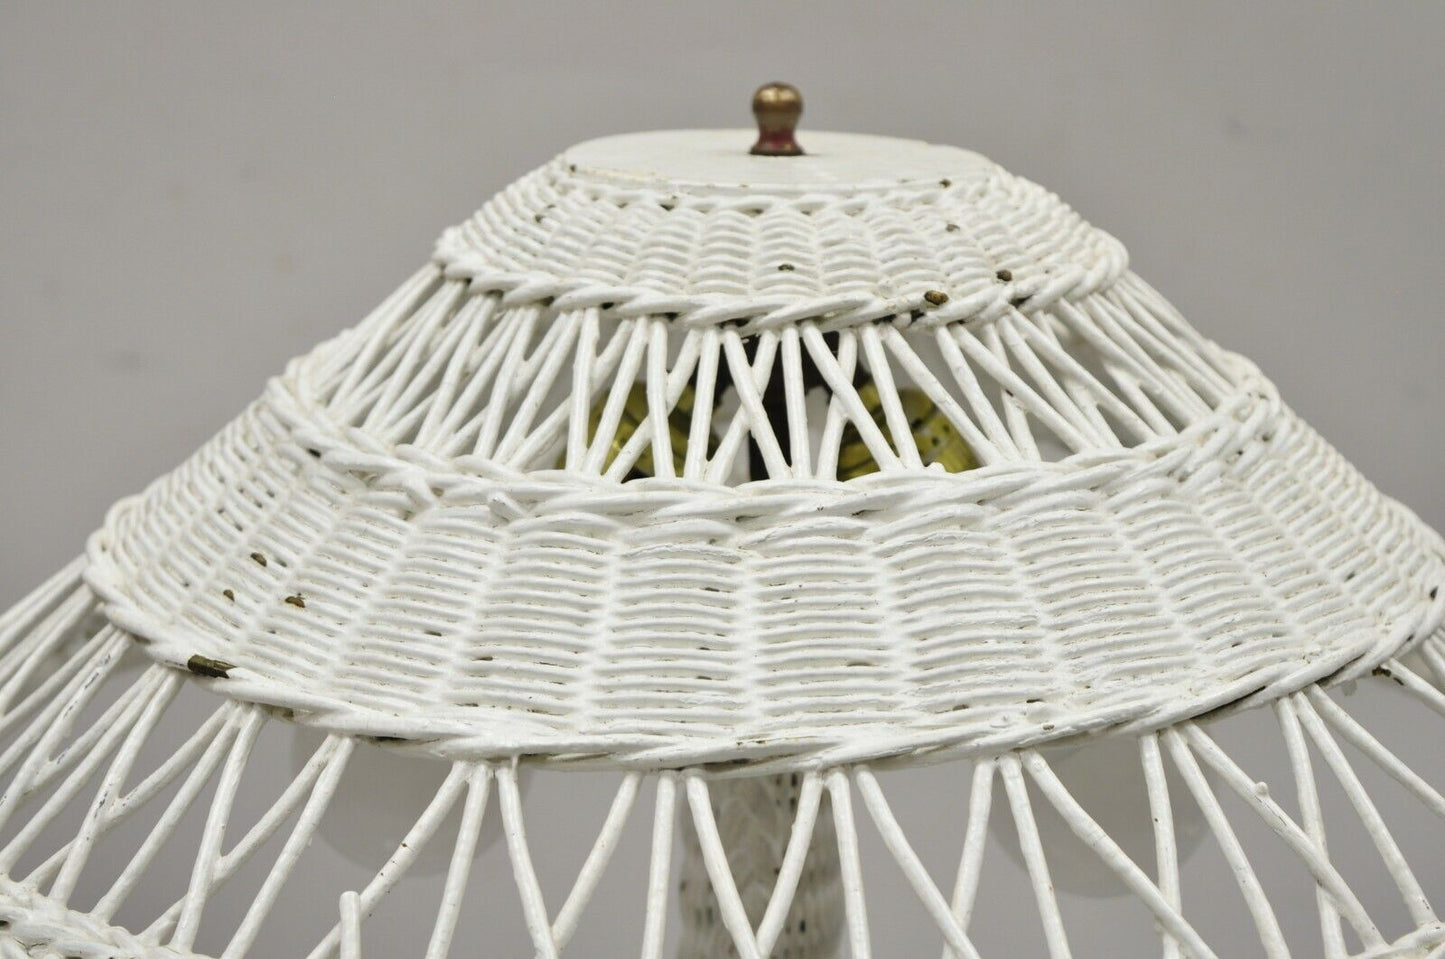 Antique Heywood Wakefield Arts & Crafts White Wicker Table Lamp With Shade